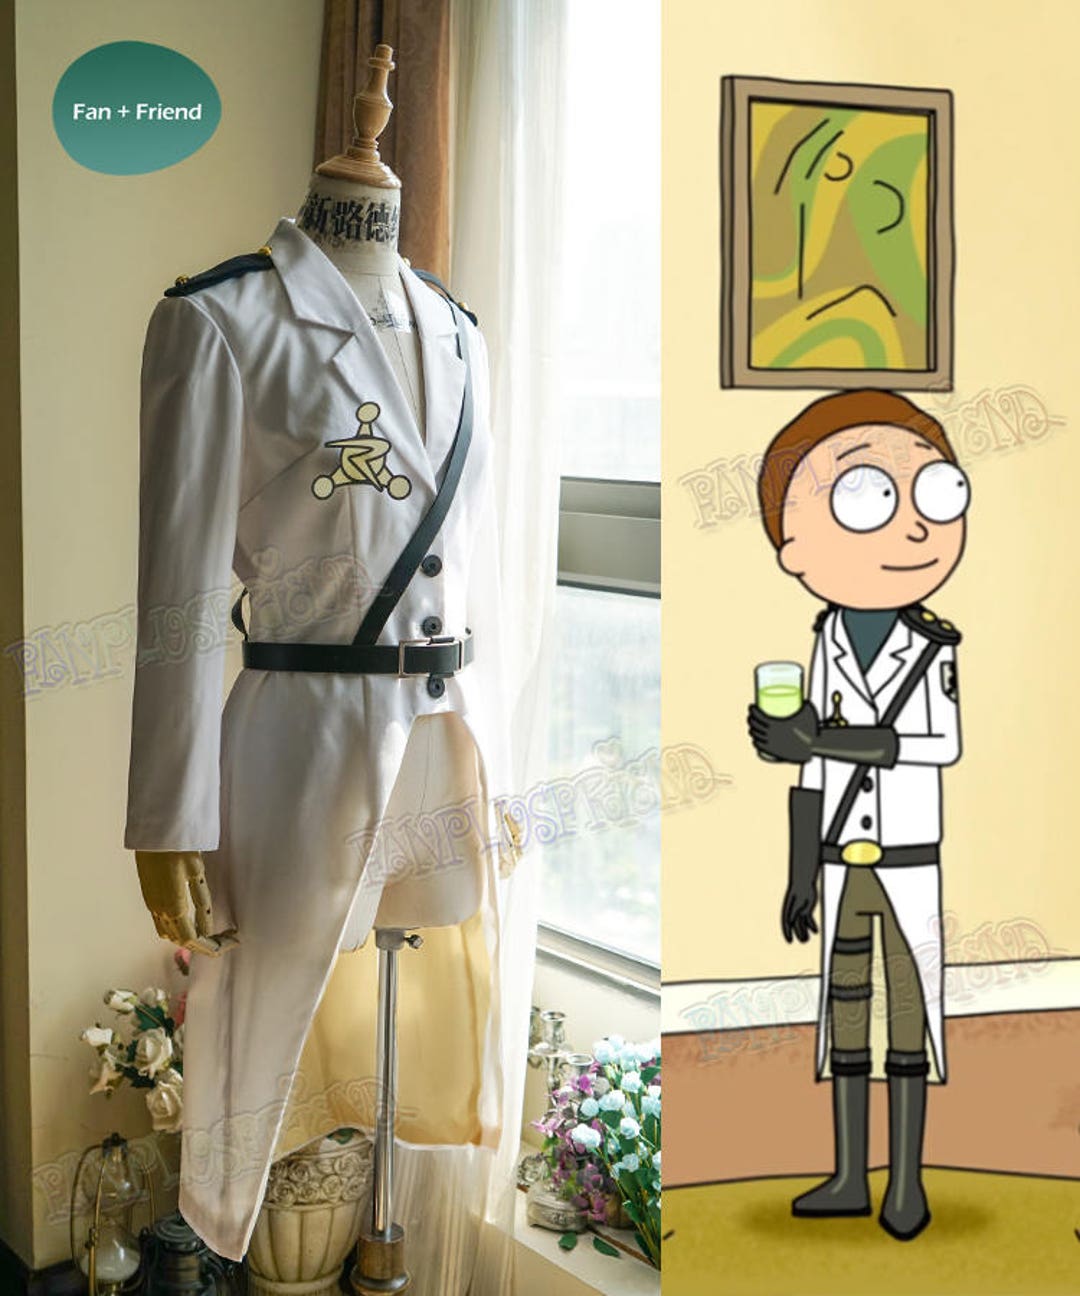 Rick and Morty TV Series Cosplay Morty Smith Uniform Jacket - Etsy